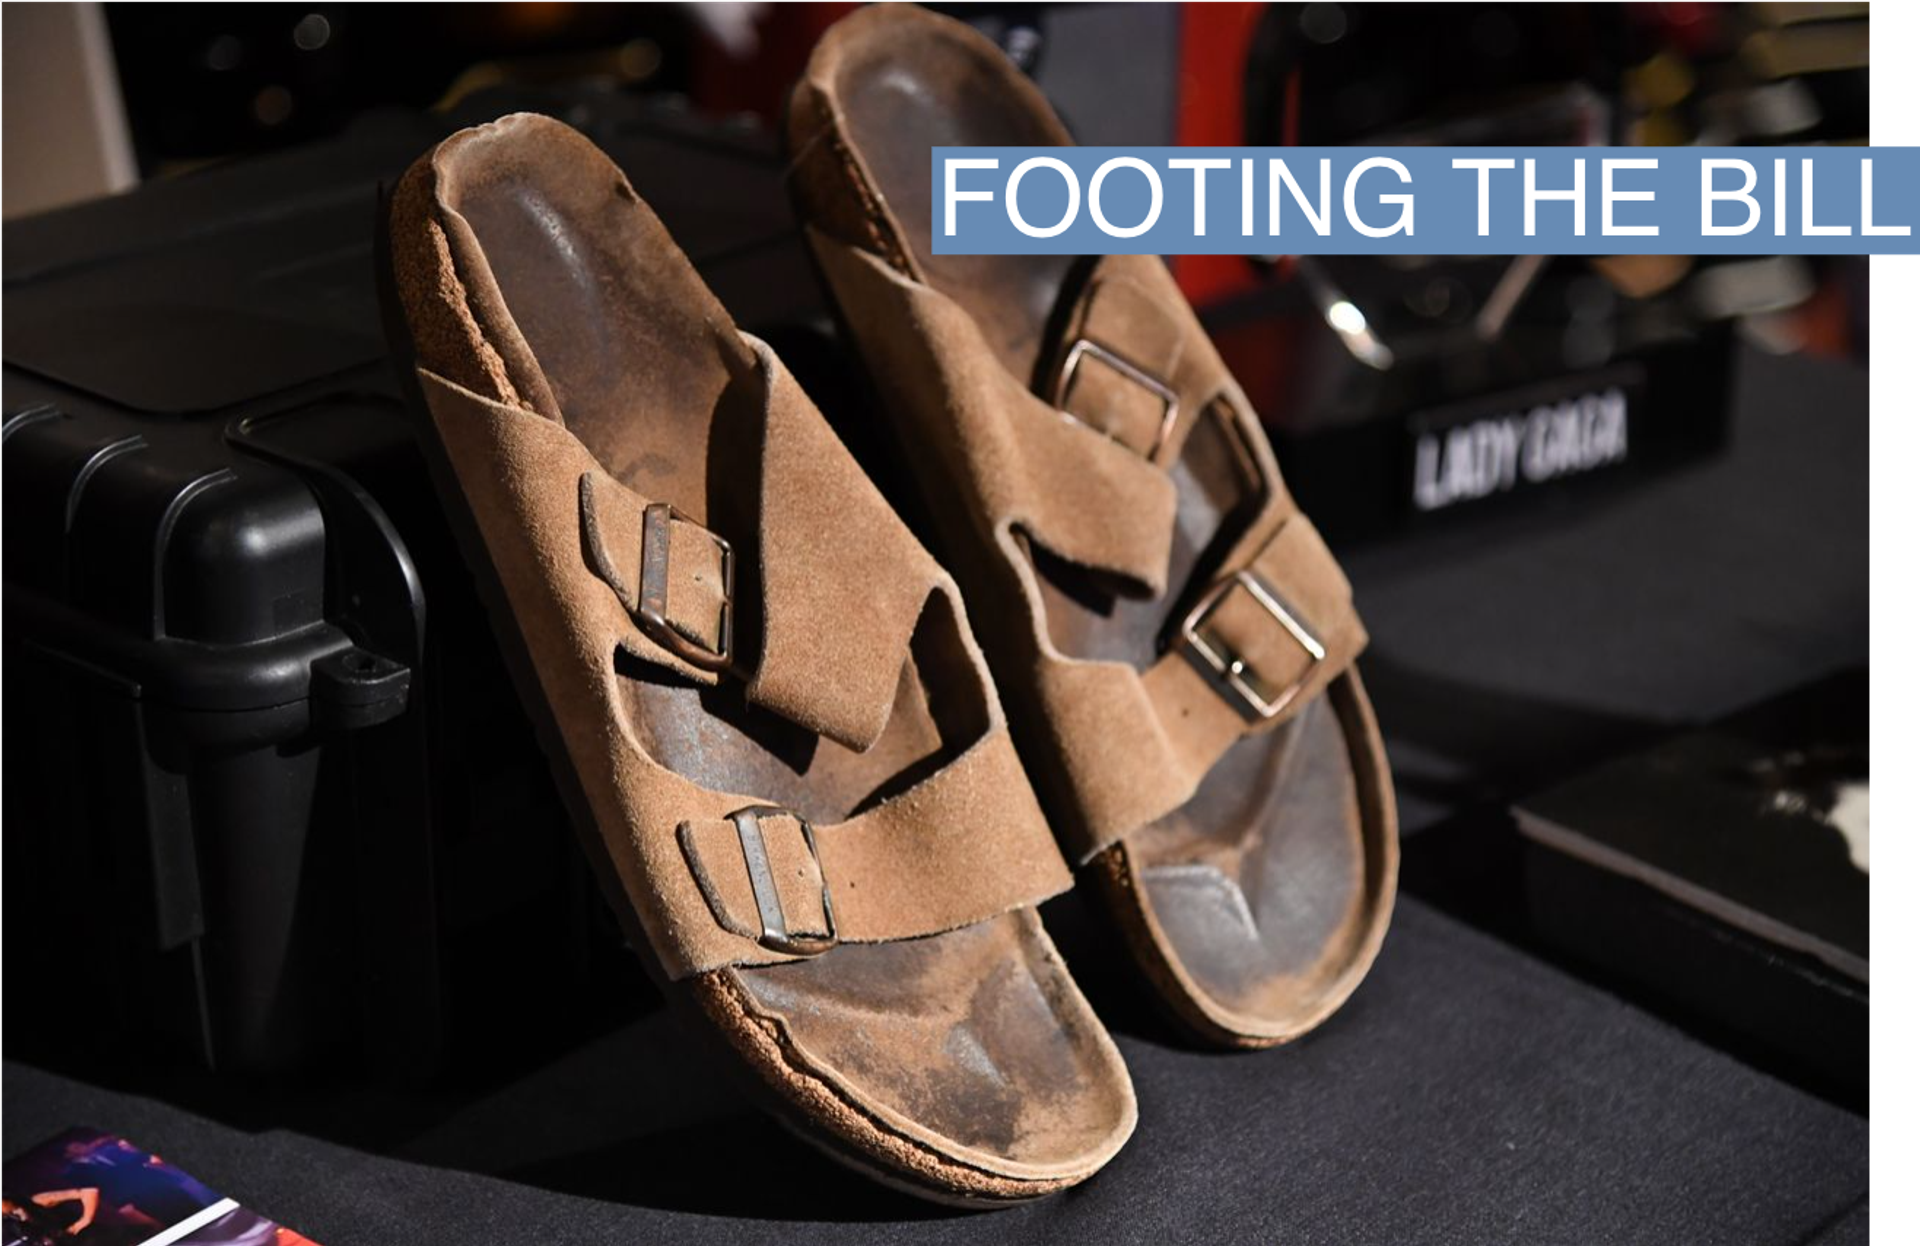 Steve Jobs' personally owned and worn Iconic Birkenstock Sandals (with book and NFT), estimate $60,000 - $80,000 is previewed before auction at the Hard Rock Cafe Times Square in New York, NY